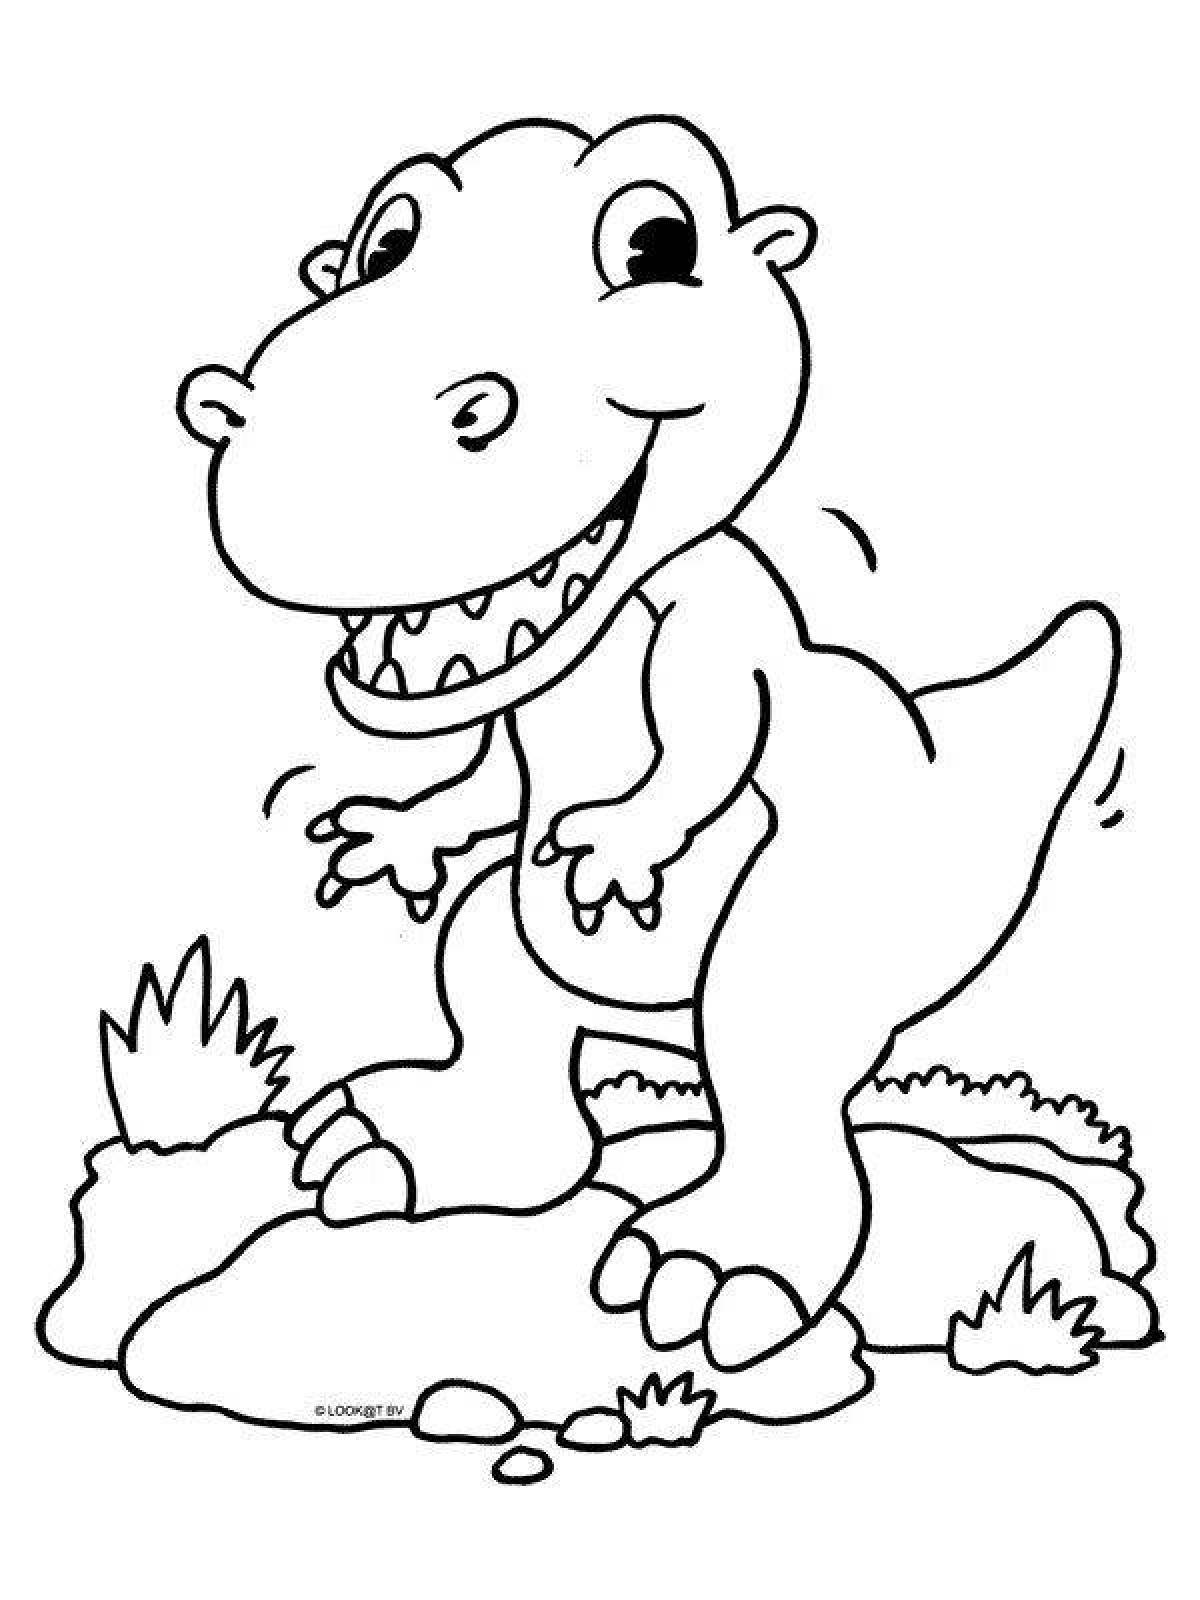 Charming dino coloring book